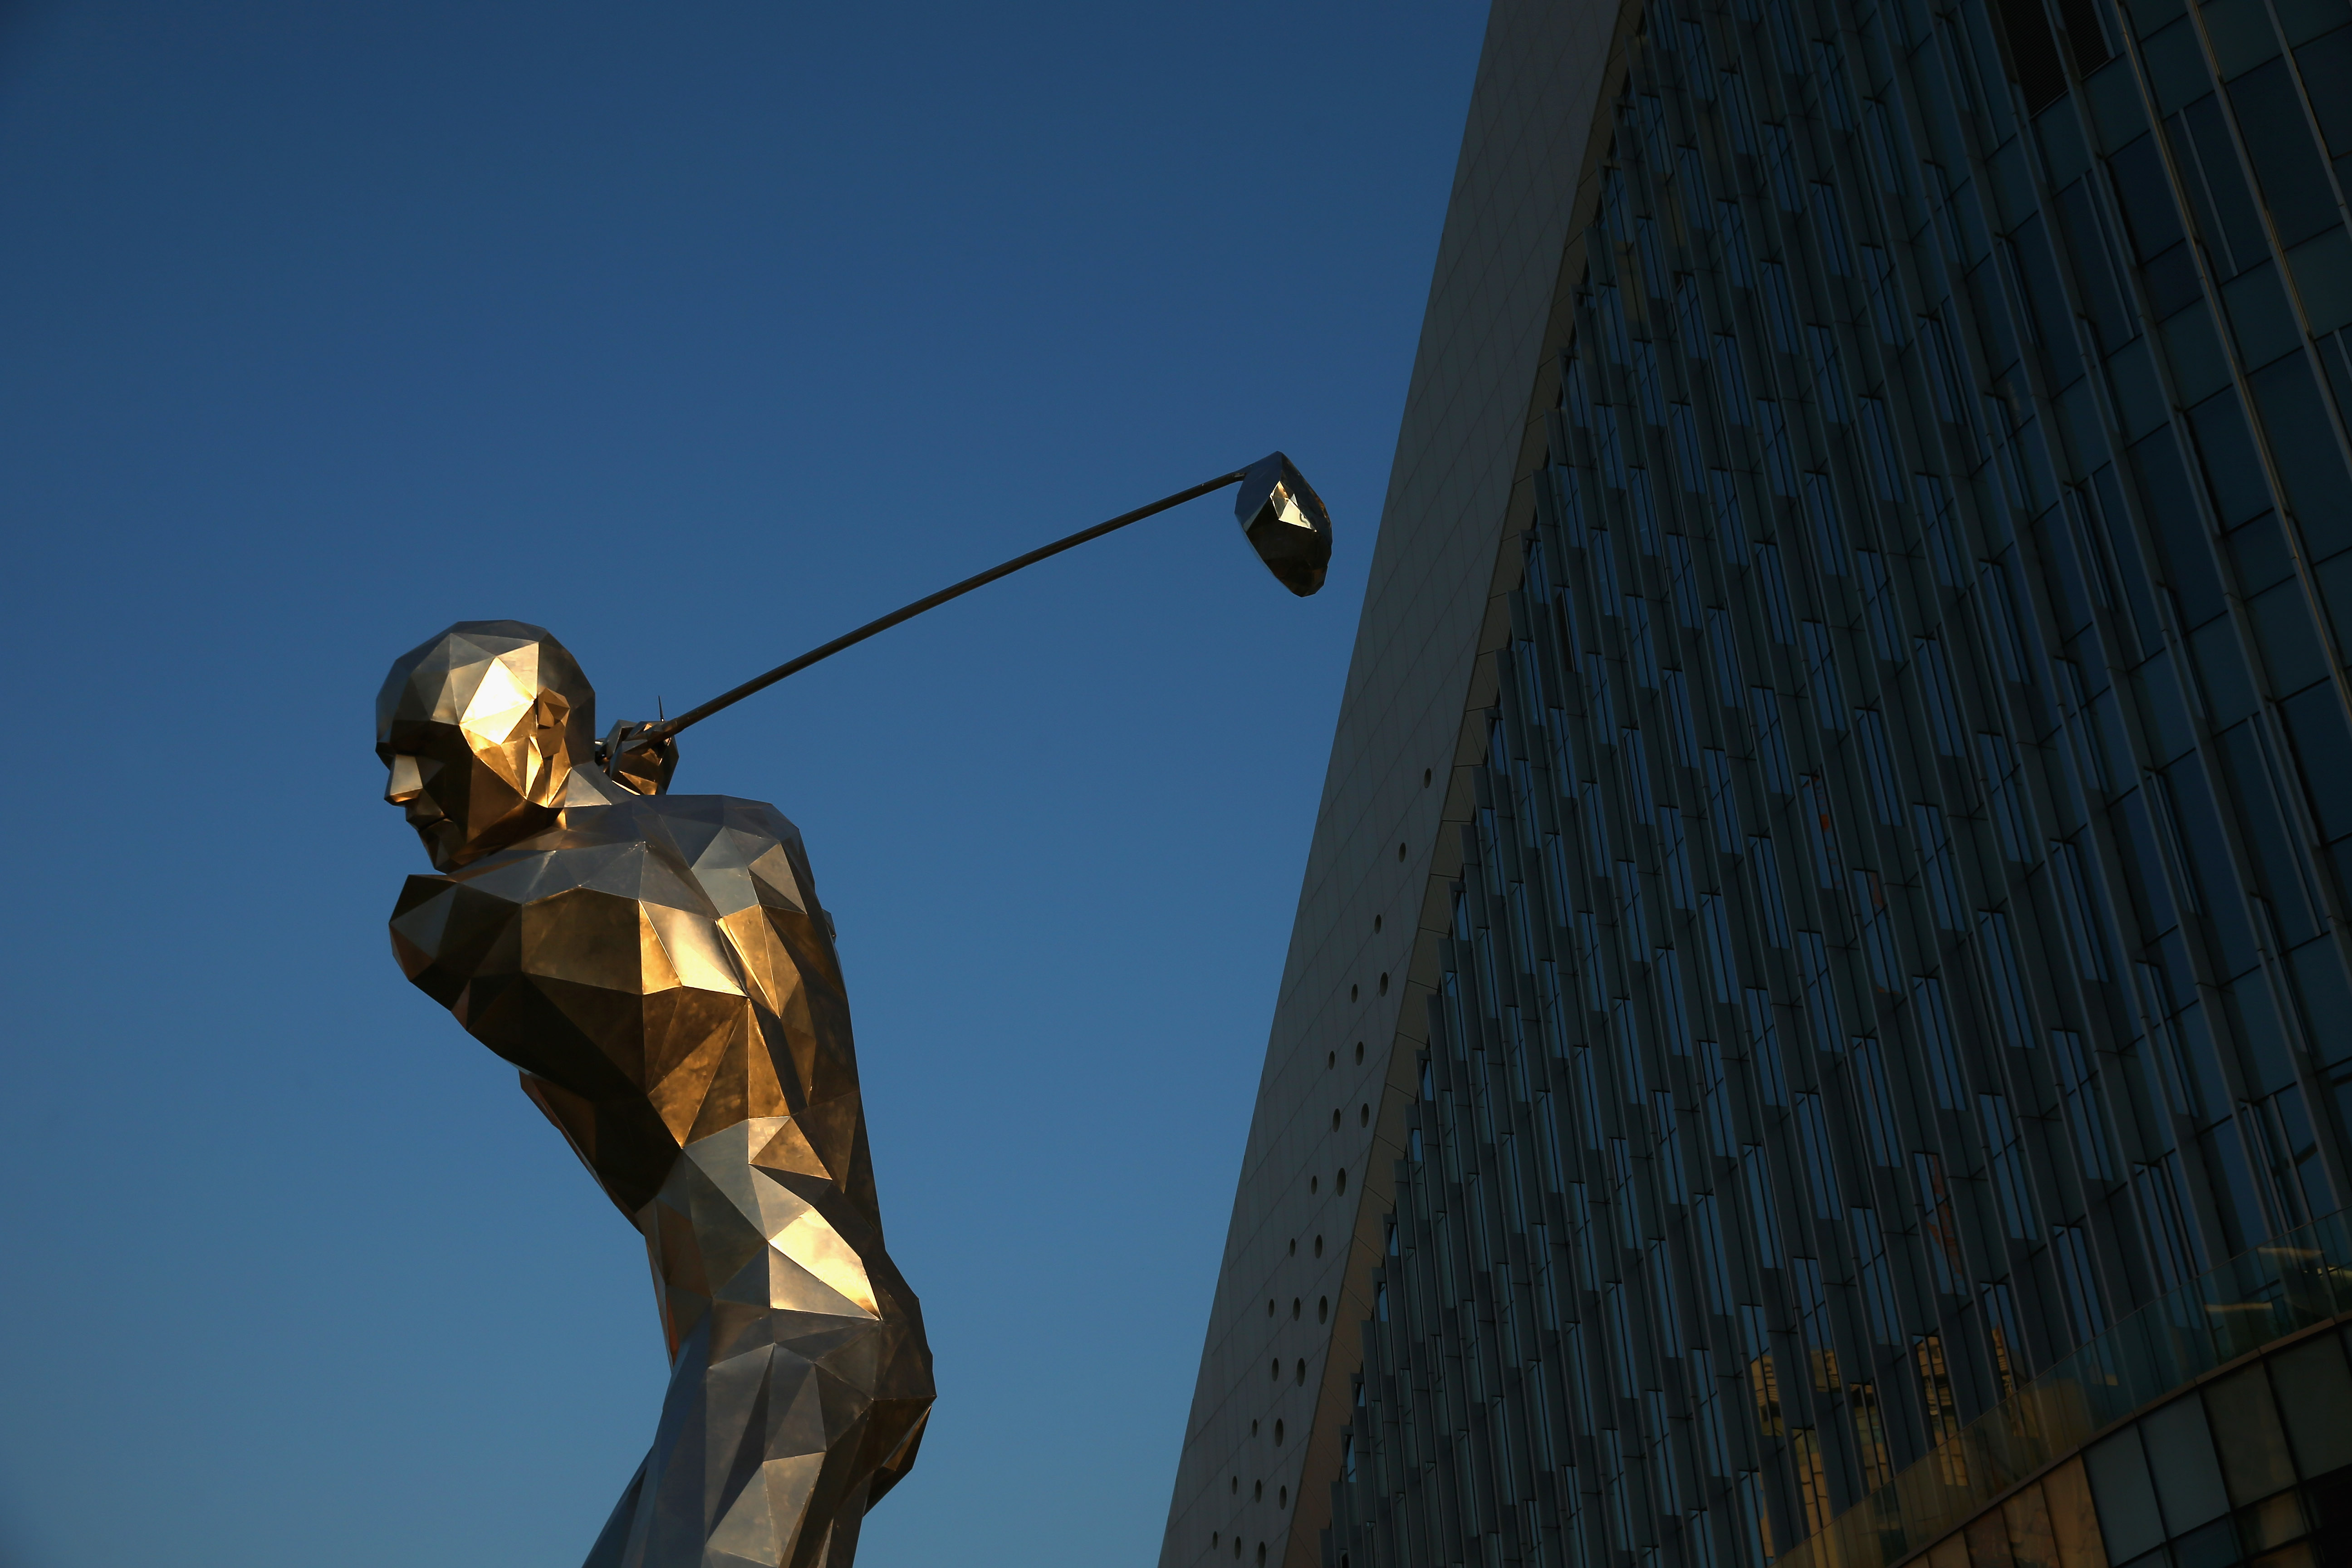 A statue of a golfer outside a futuristic office building.